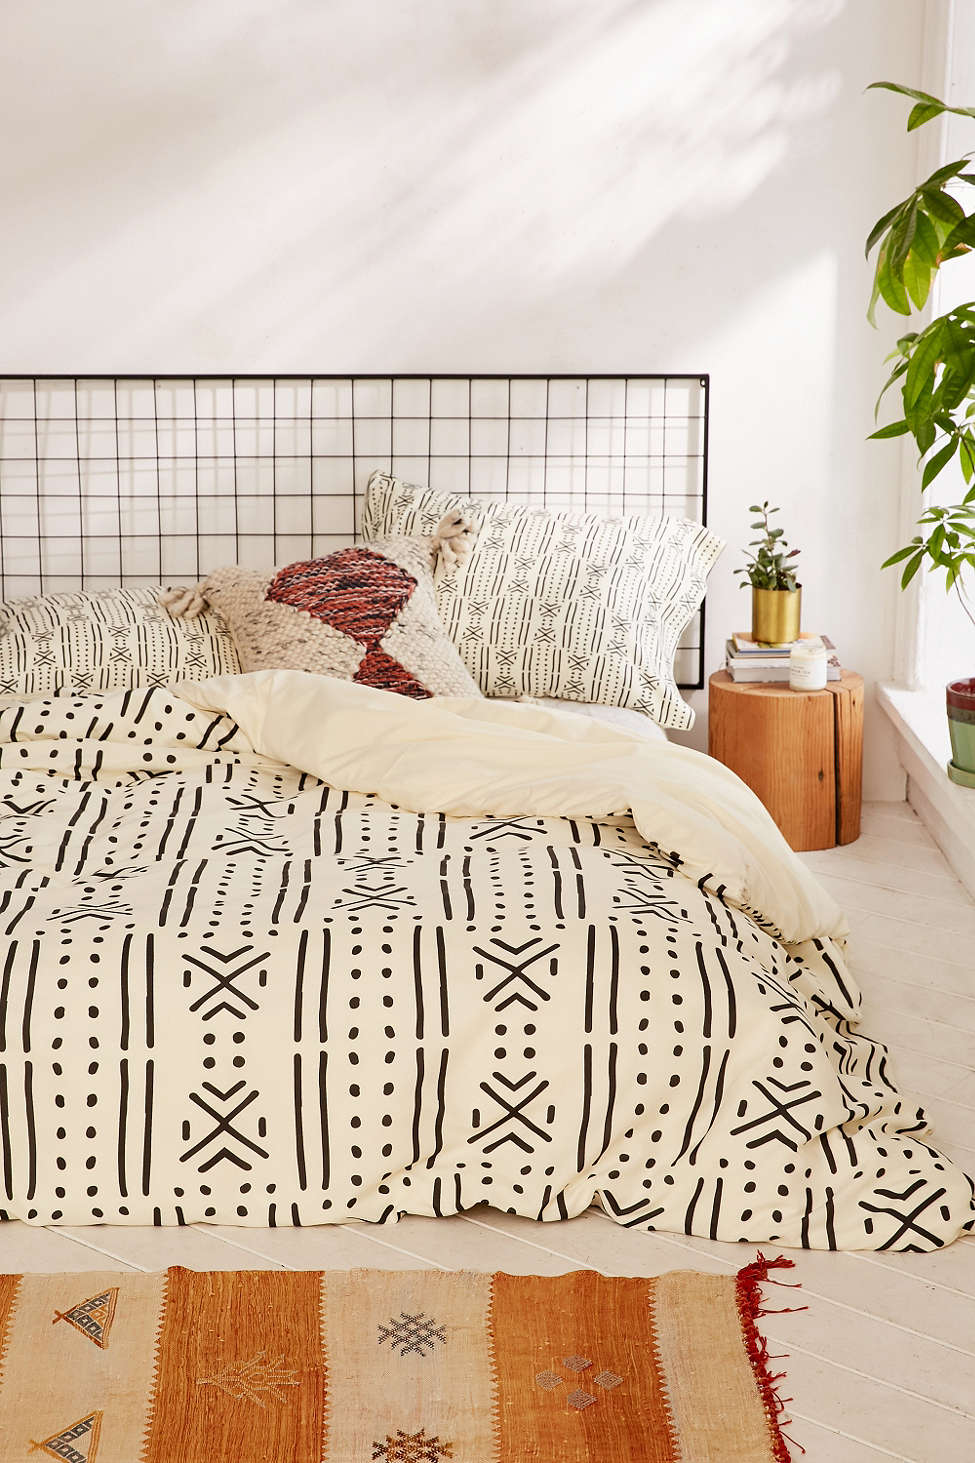 Mud cloth-style duvet cover from Urban Outfitters